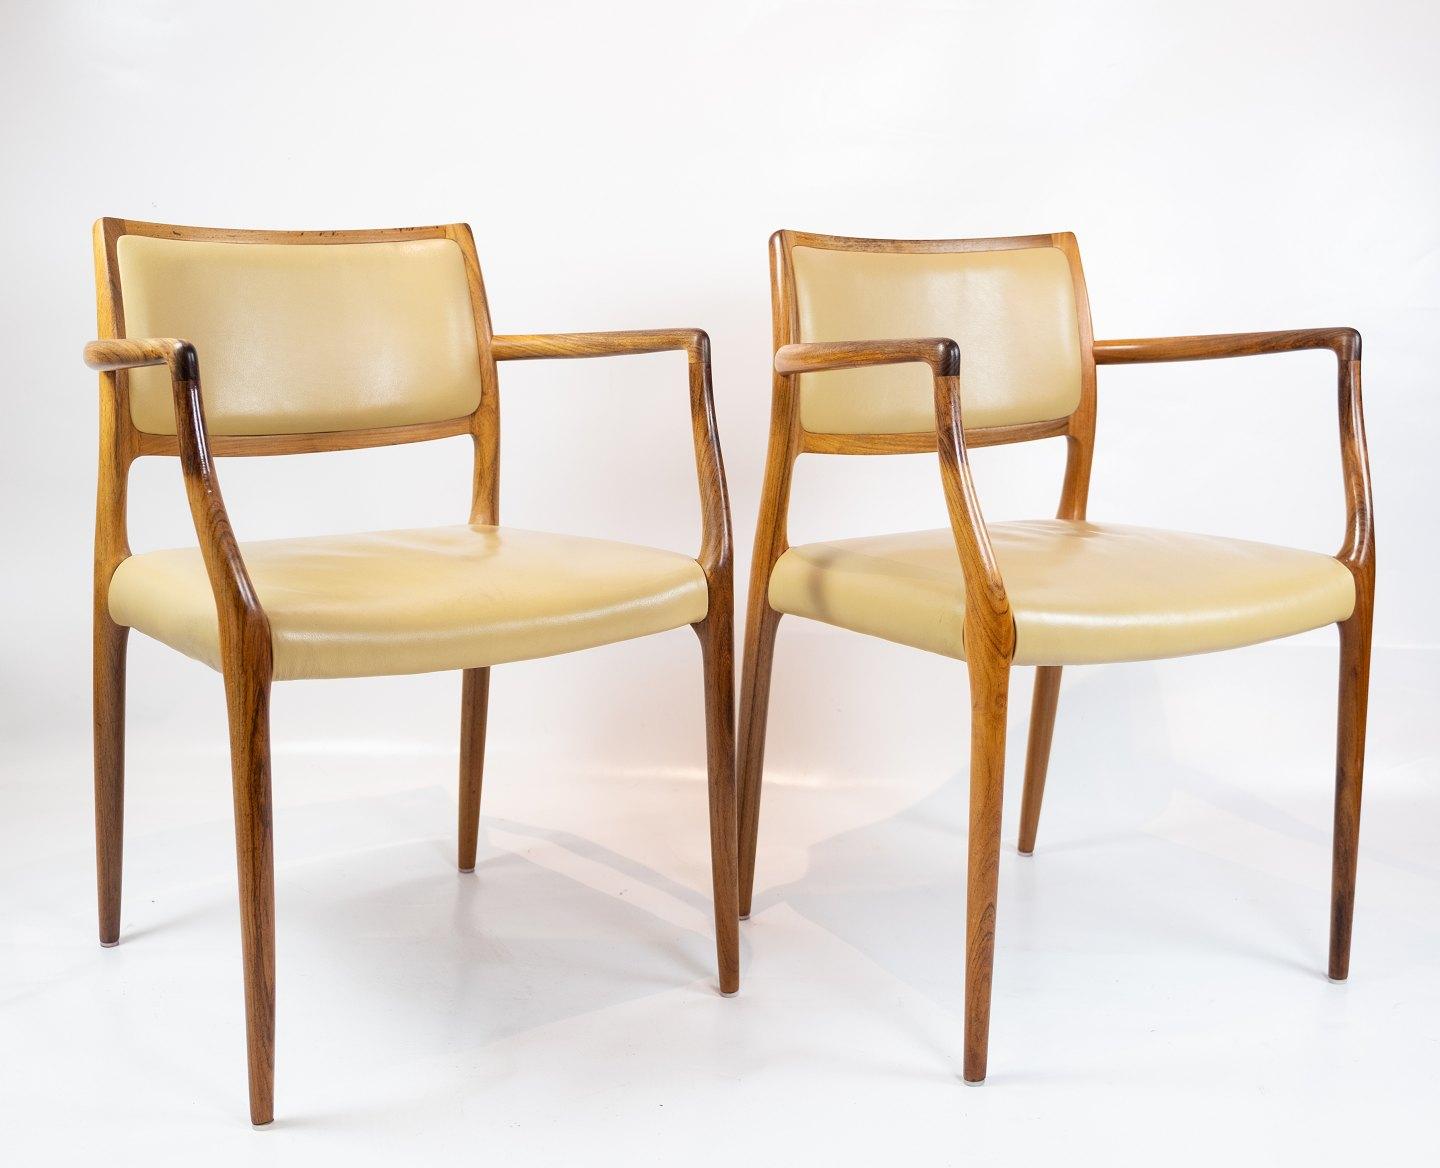 A few N.O. Møller armchairs, model 65, in rosewood and light leather, manufactured by J.L. Møller in the late 1960s and designed in 1968.

These armchairs are an exemplary expression of Danish furniture craftsmanship and design from that era. The